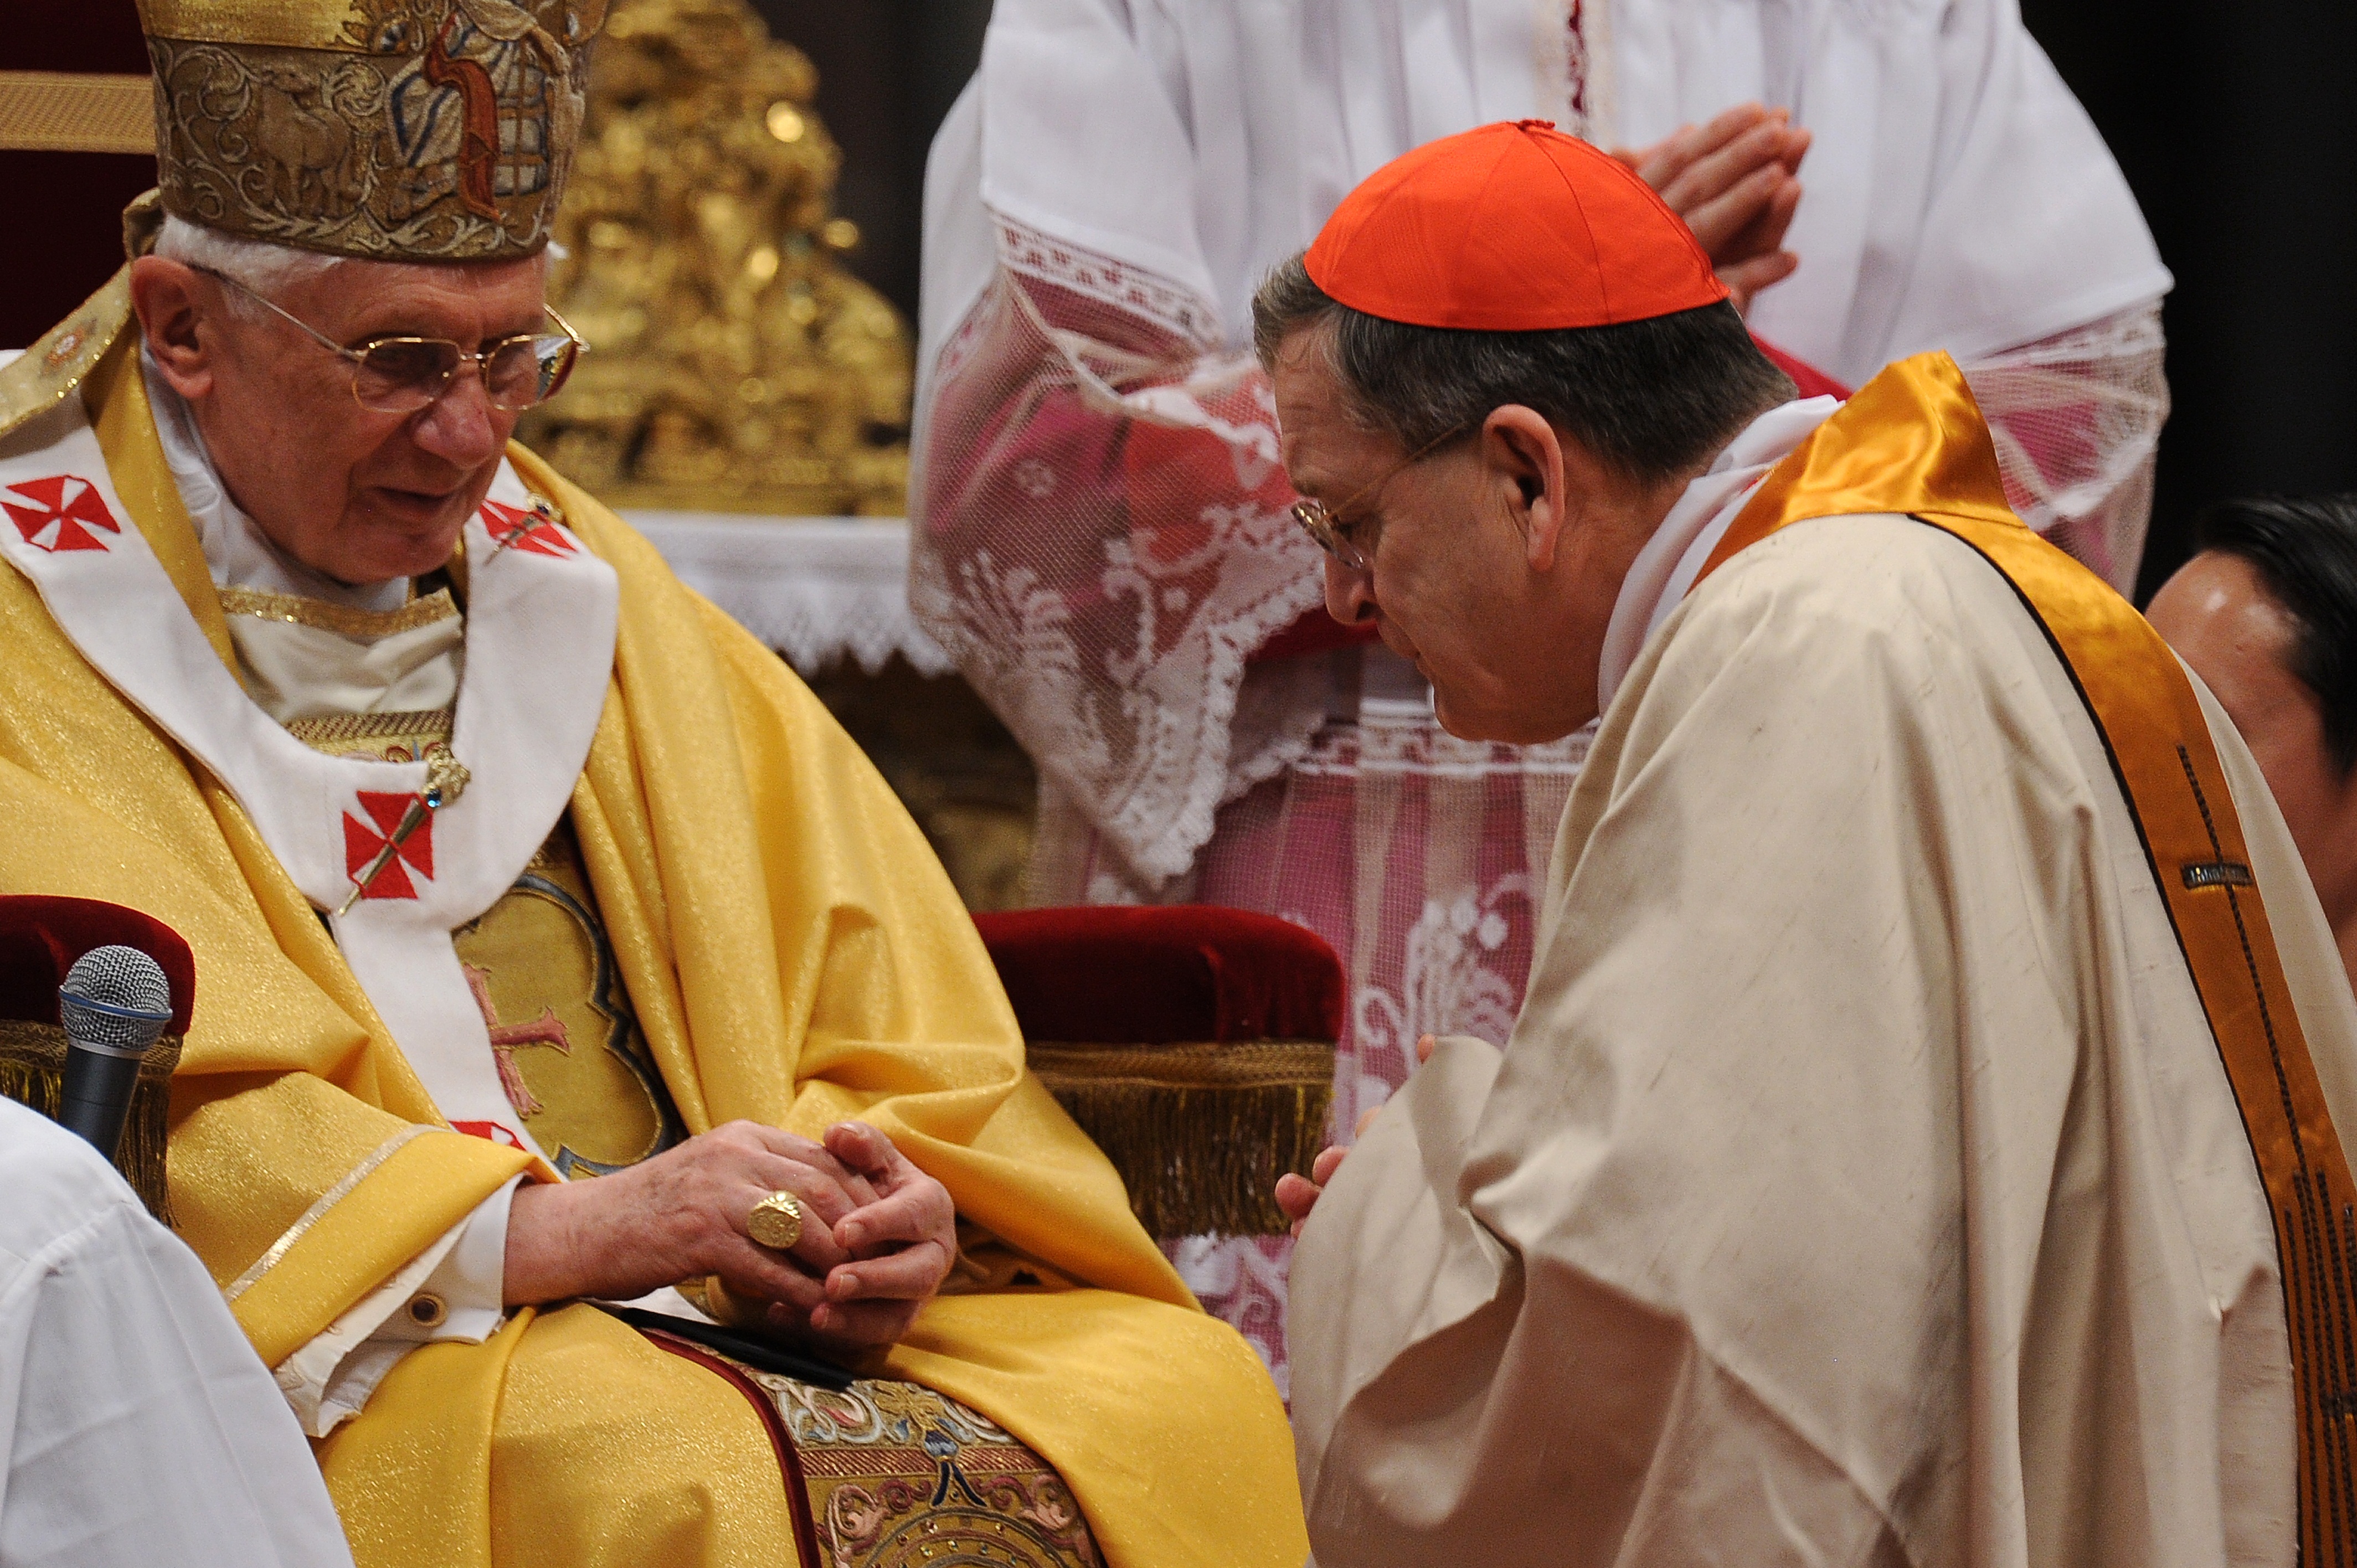 Pope Benedict XVI (L) gives his cardinal ring to US Raymond leo Burke (R) during the Eucharistic celebration with the new cardinals on November 21, 2010 at St Peter's basilica at The Vatican. 24 Roman Catholic prelates joined the day before the Vatican's College of Cardinals, the elite body that advises the pontiff and elects his successor upon his death. AFP PHOTO / ALBERTO PIZZOLI (Photo credit should read ALBERTO PIZZOLI/AFP via Getty Images)